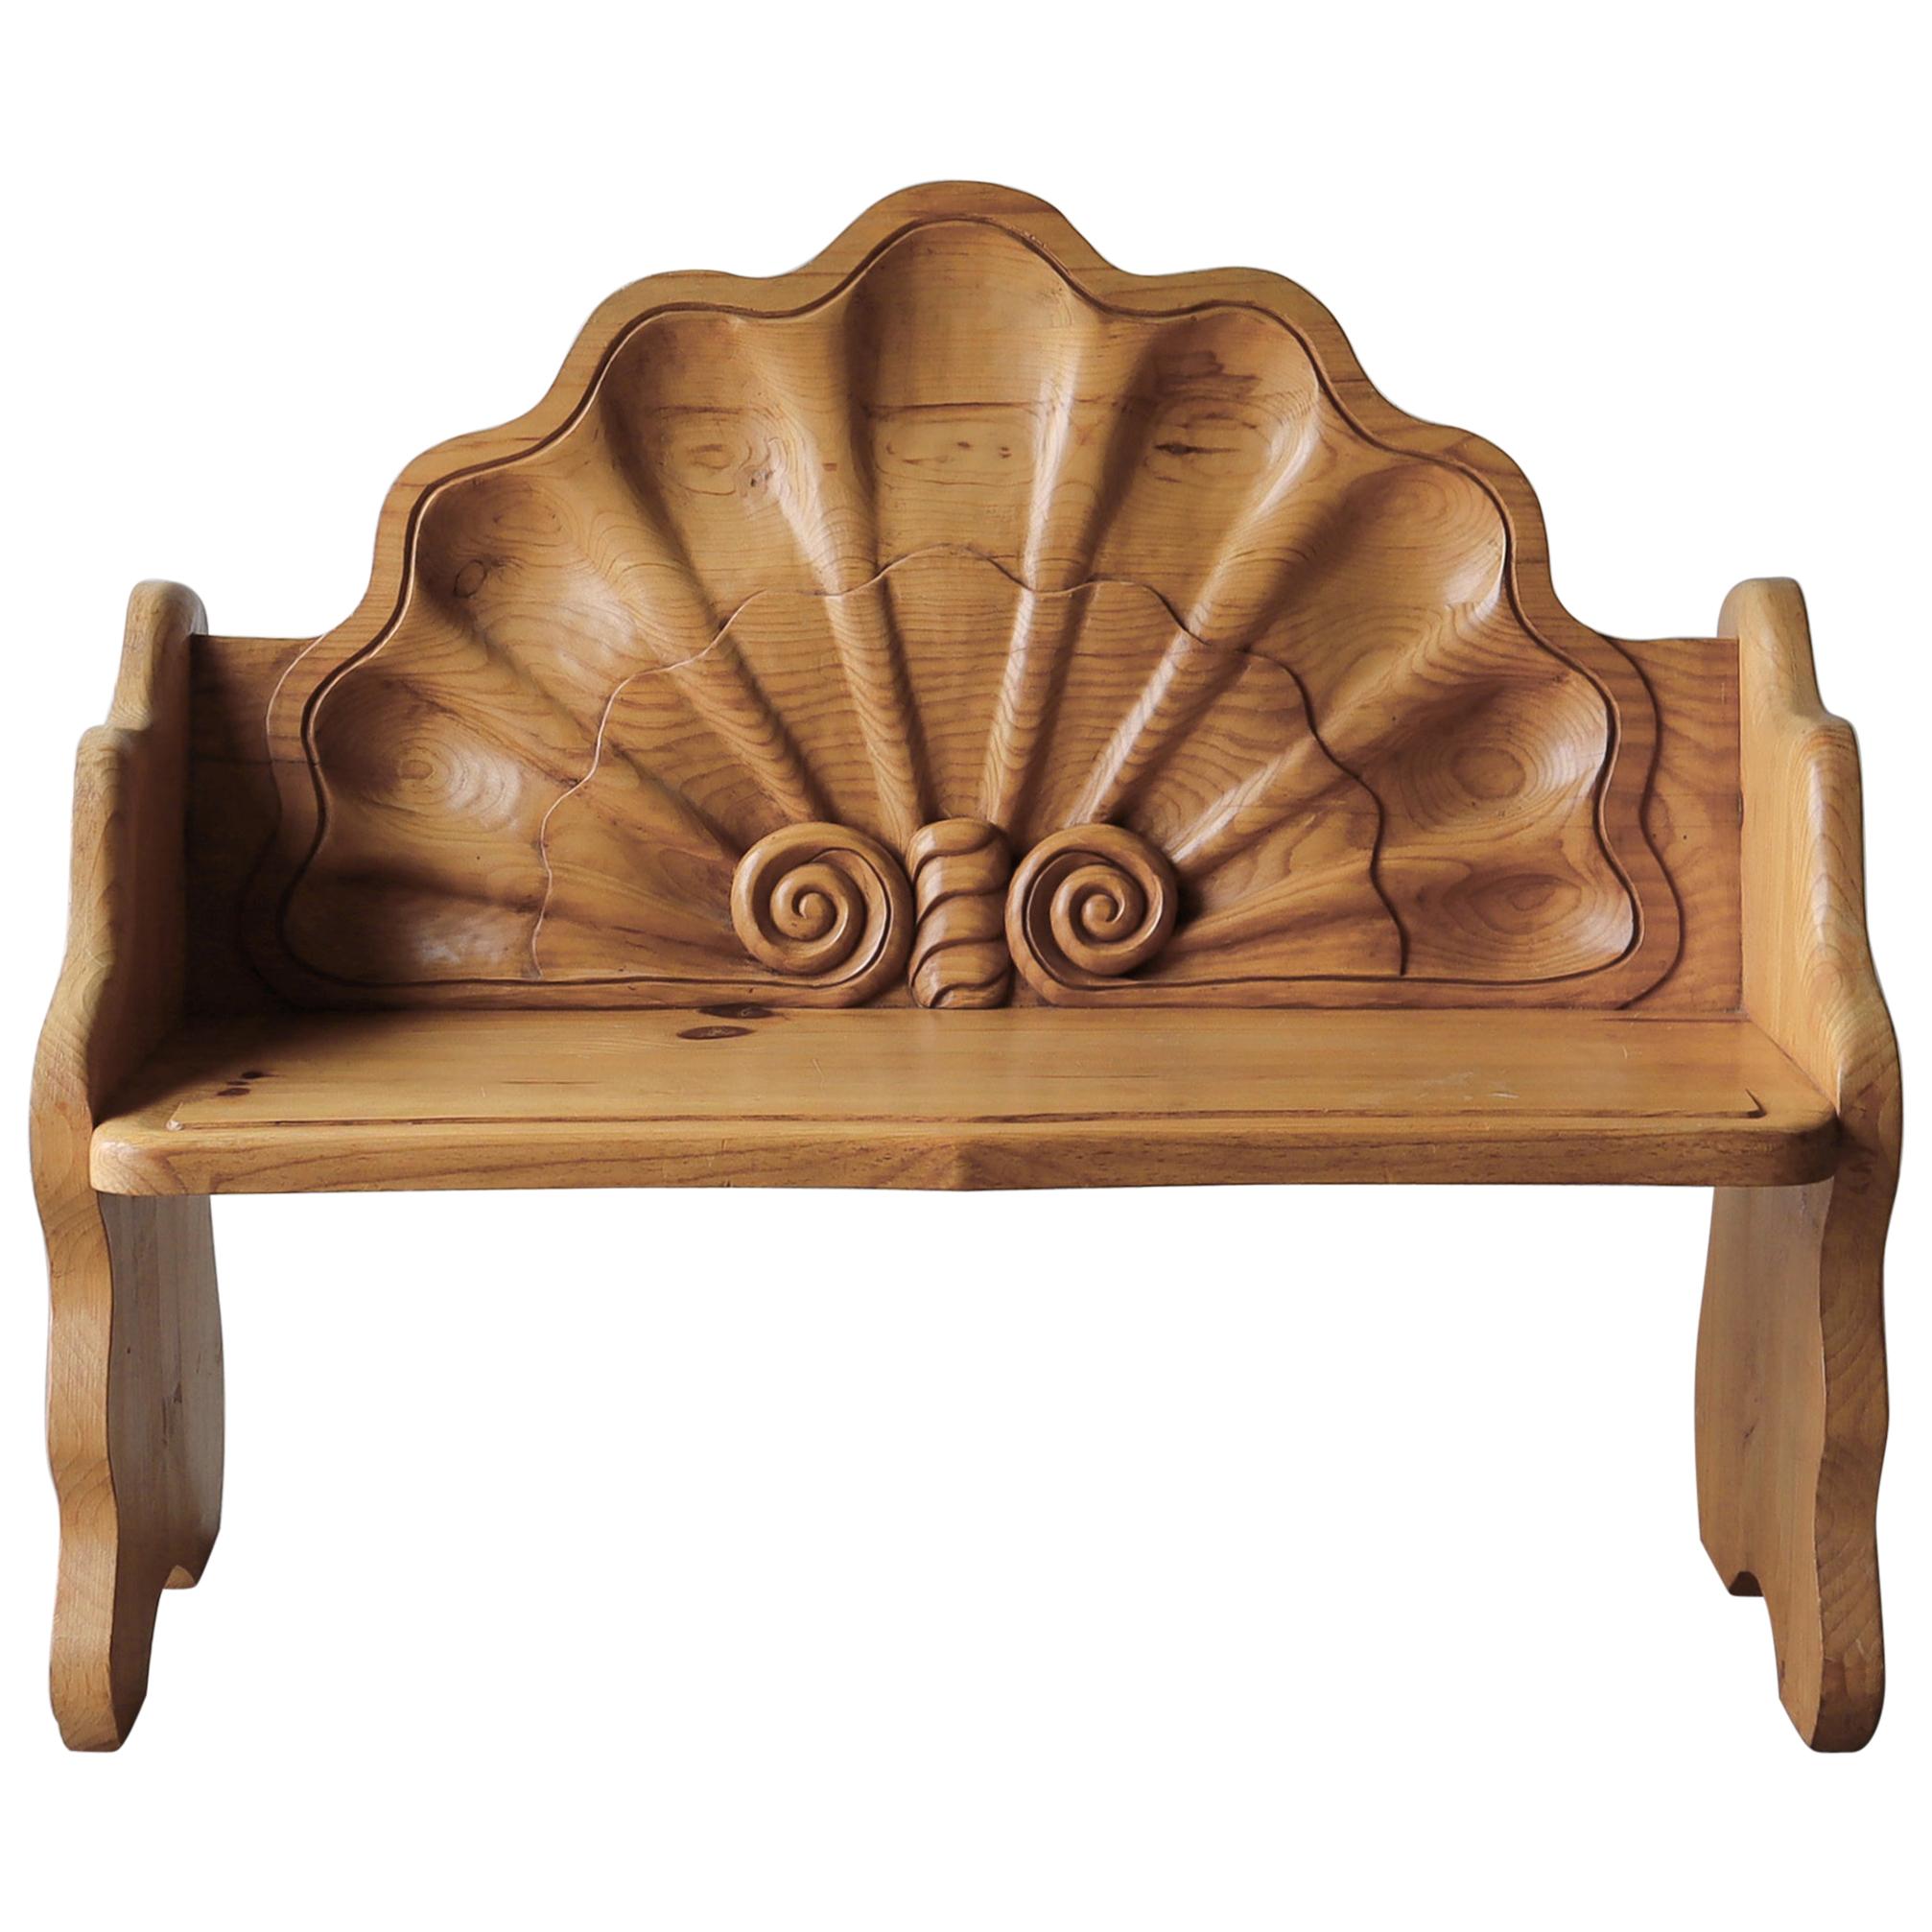 Vintage Hand Carved Wood Shell Motif Bench